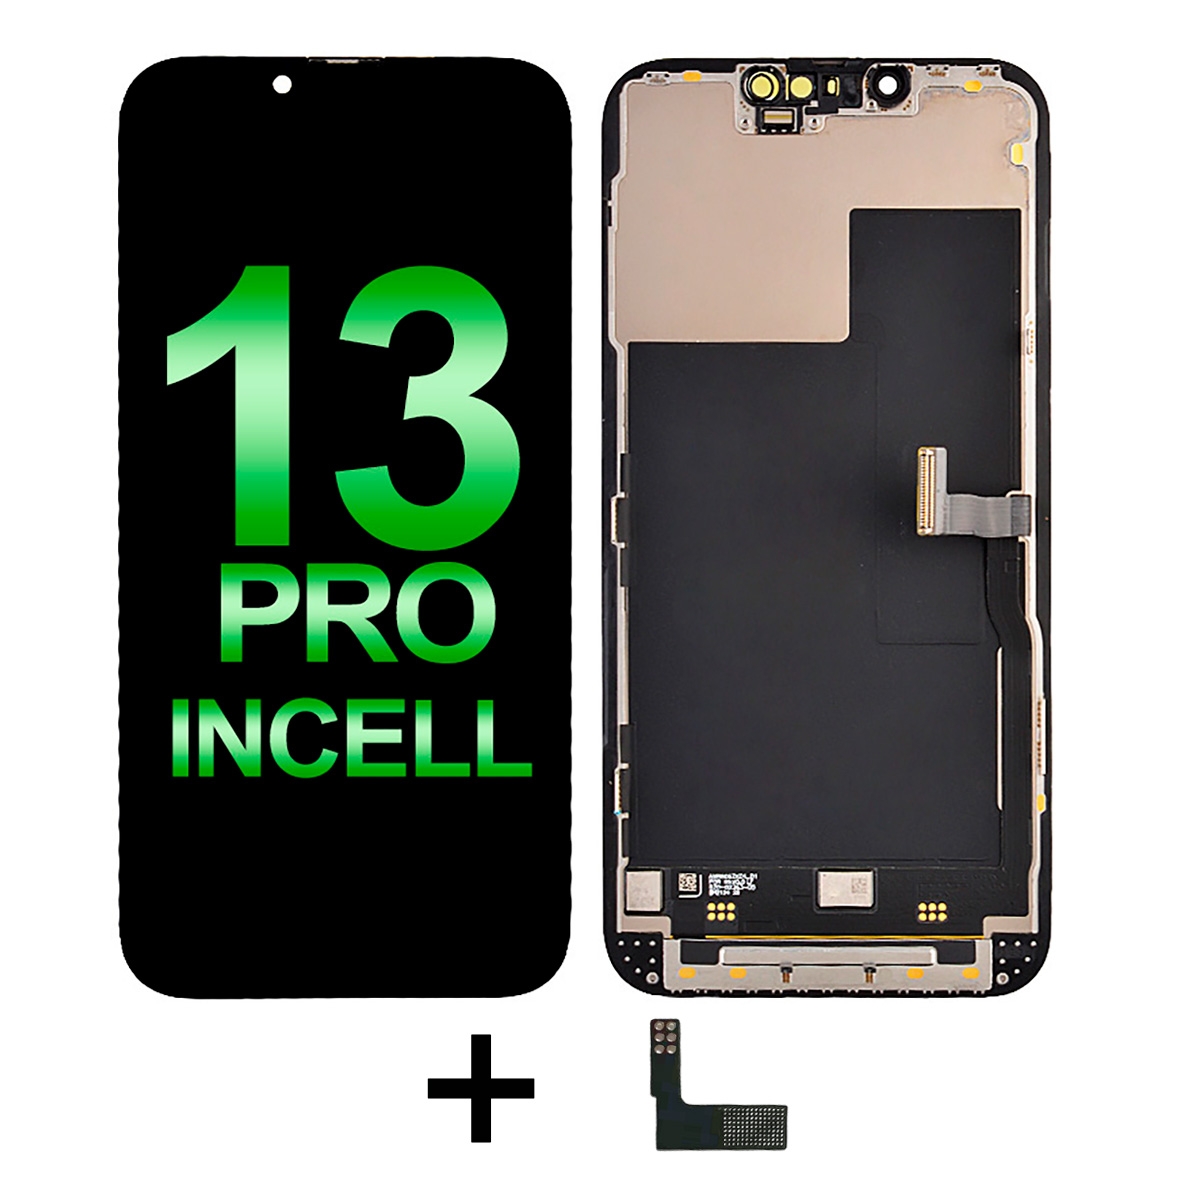 PH-LCD-IP-001233BKIR LCD Screen Digitizer Assembly With Portable IC for iPhone 13 Pro (Incell/ COF)